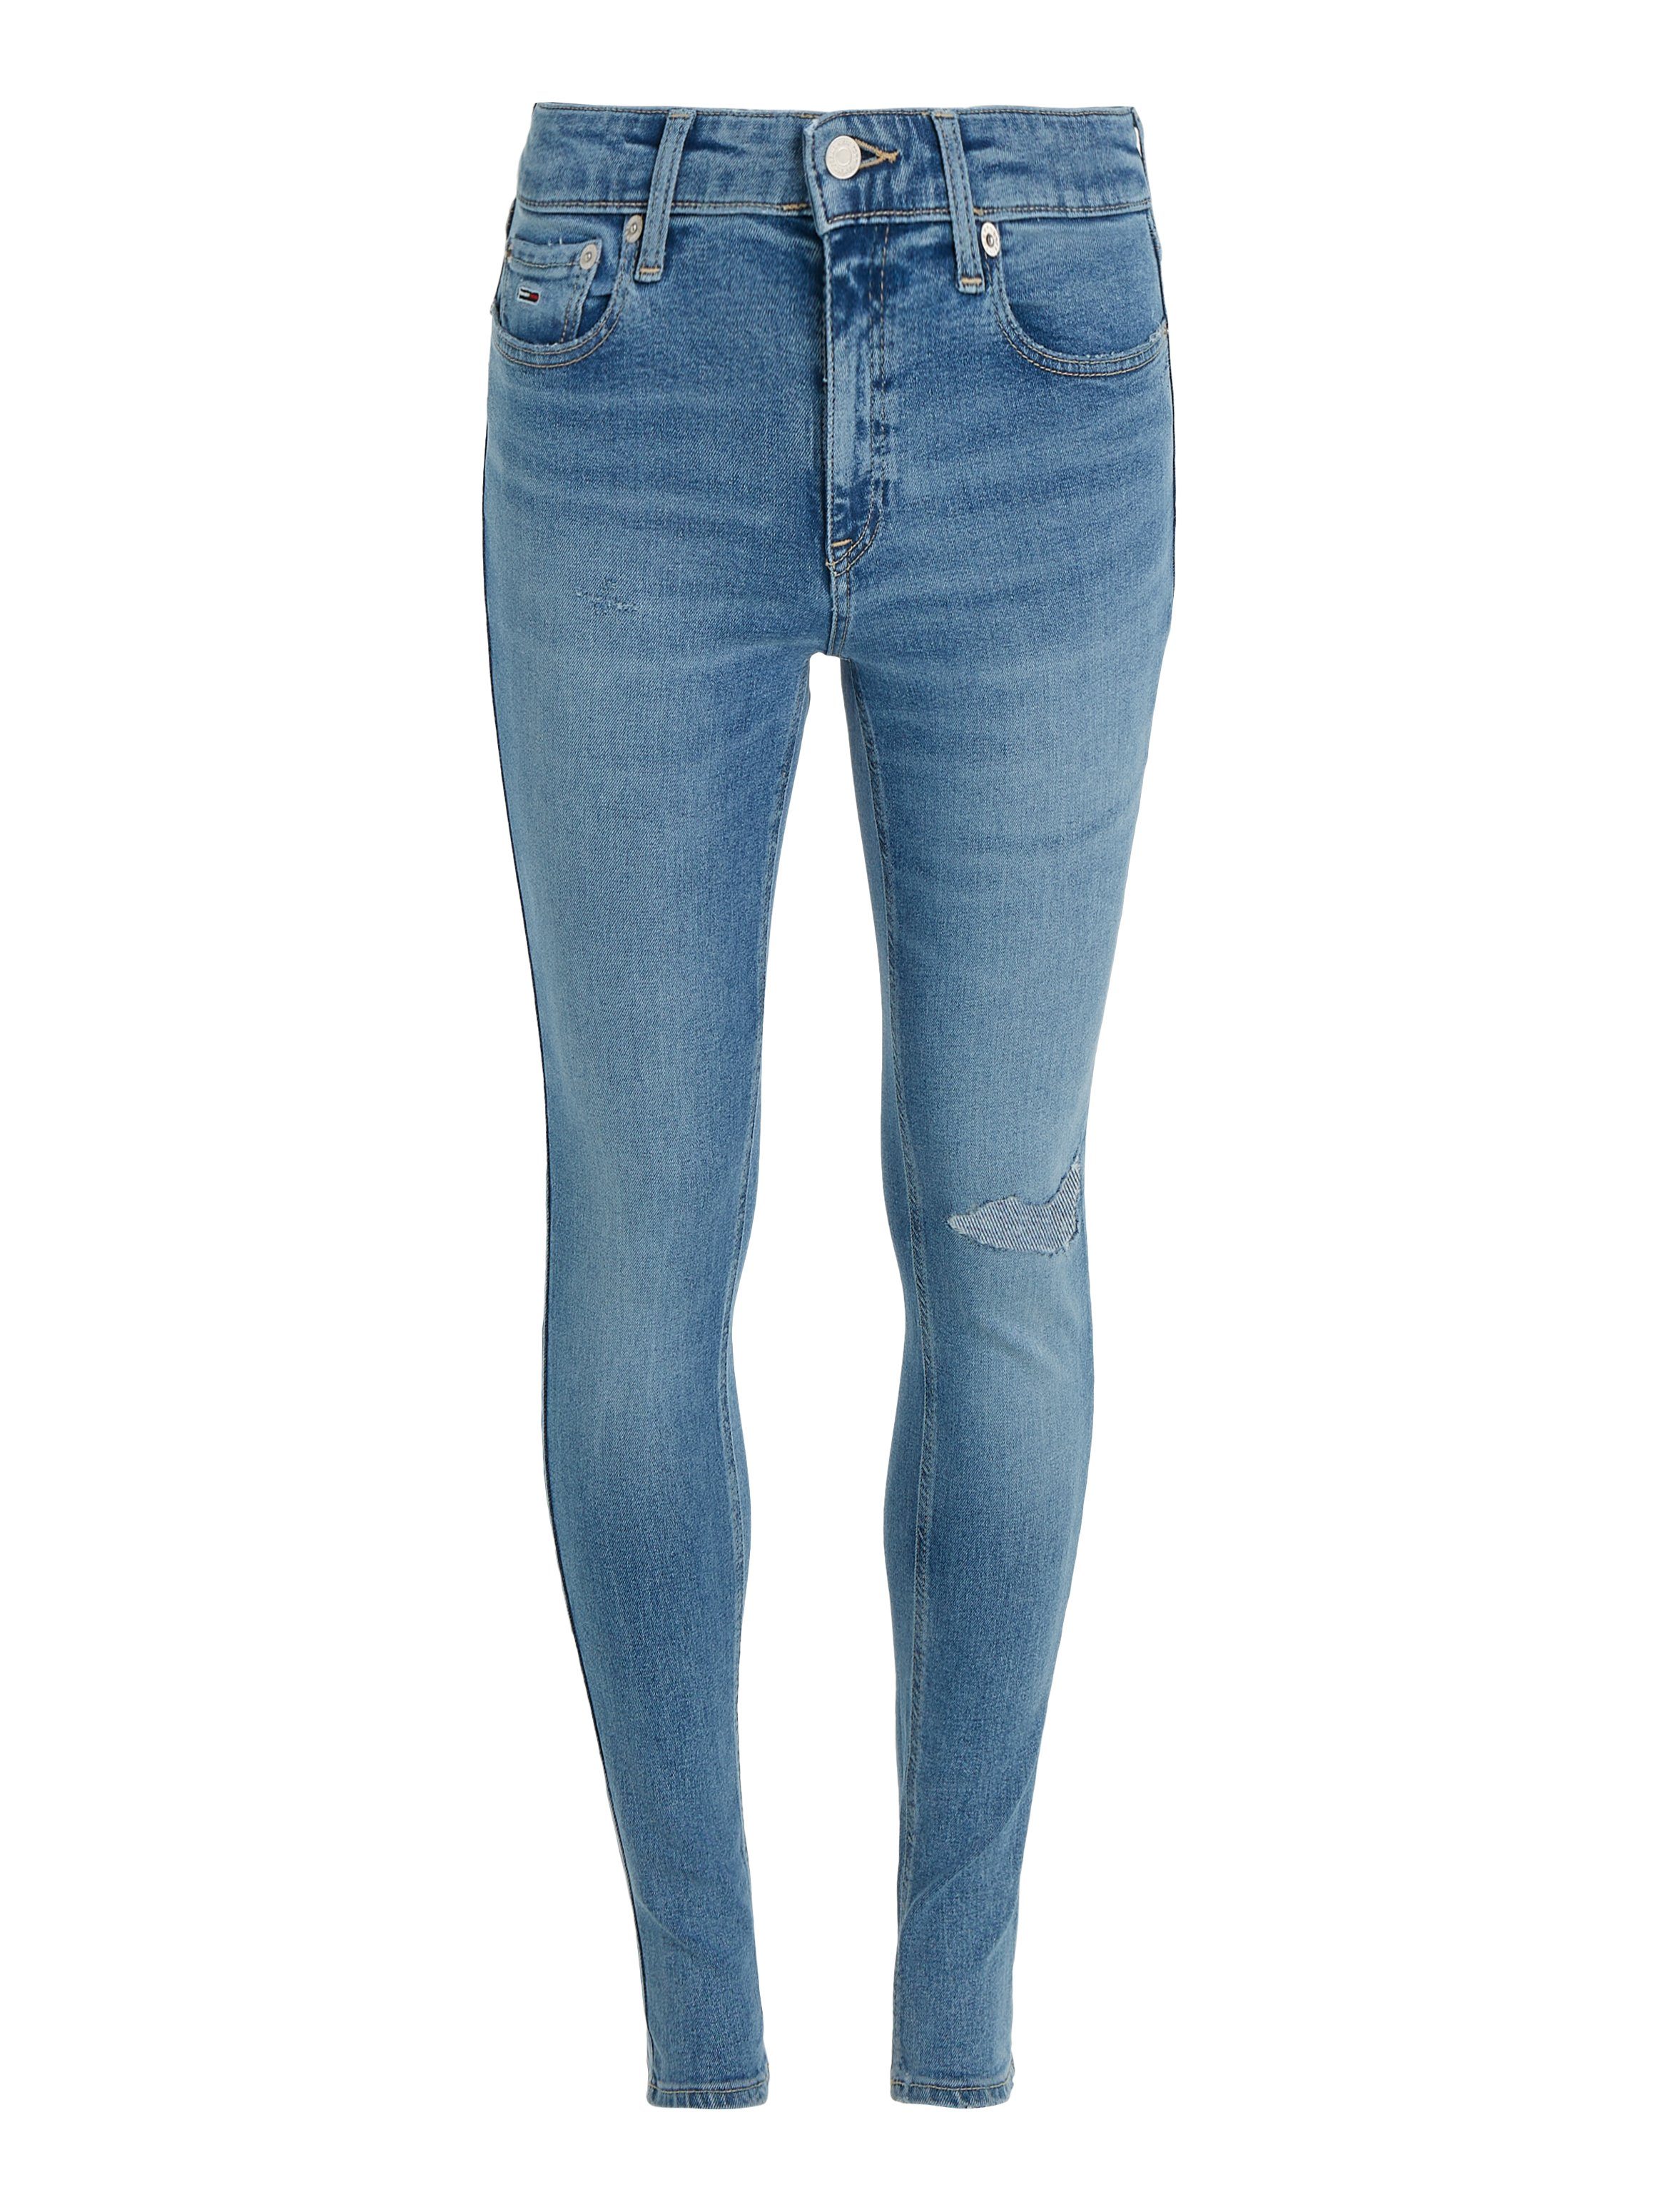 Tommy Jeans Skinny-fit-Jeans Nora mit Tommy Markenlabel denim3 Badge light Farbe Jeans &